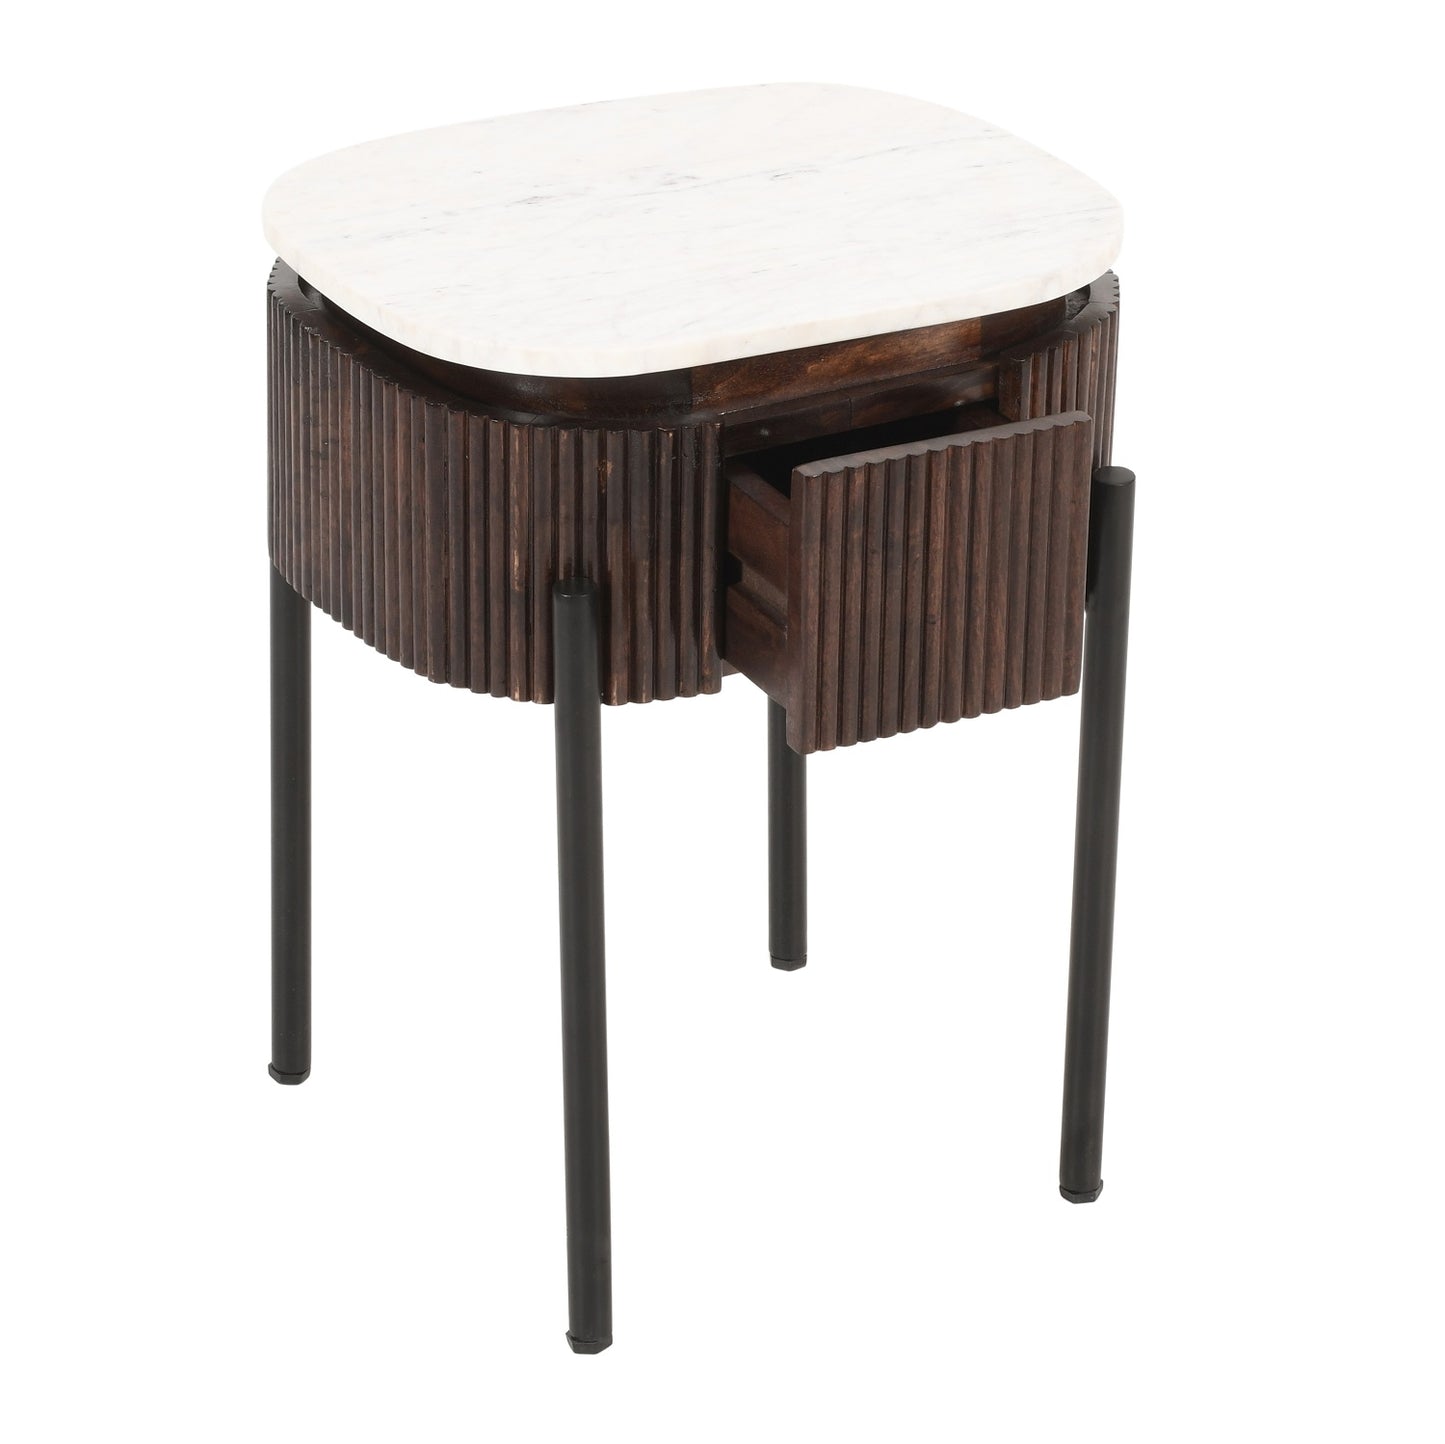 Opal Mango Wood Bedside Table With Marble Top & Metal Legs